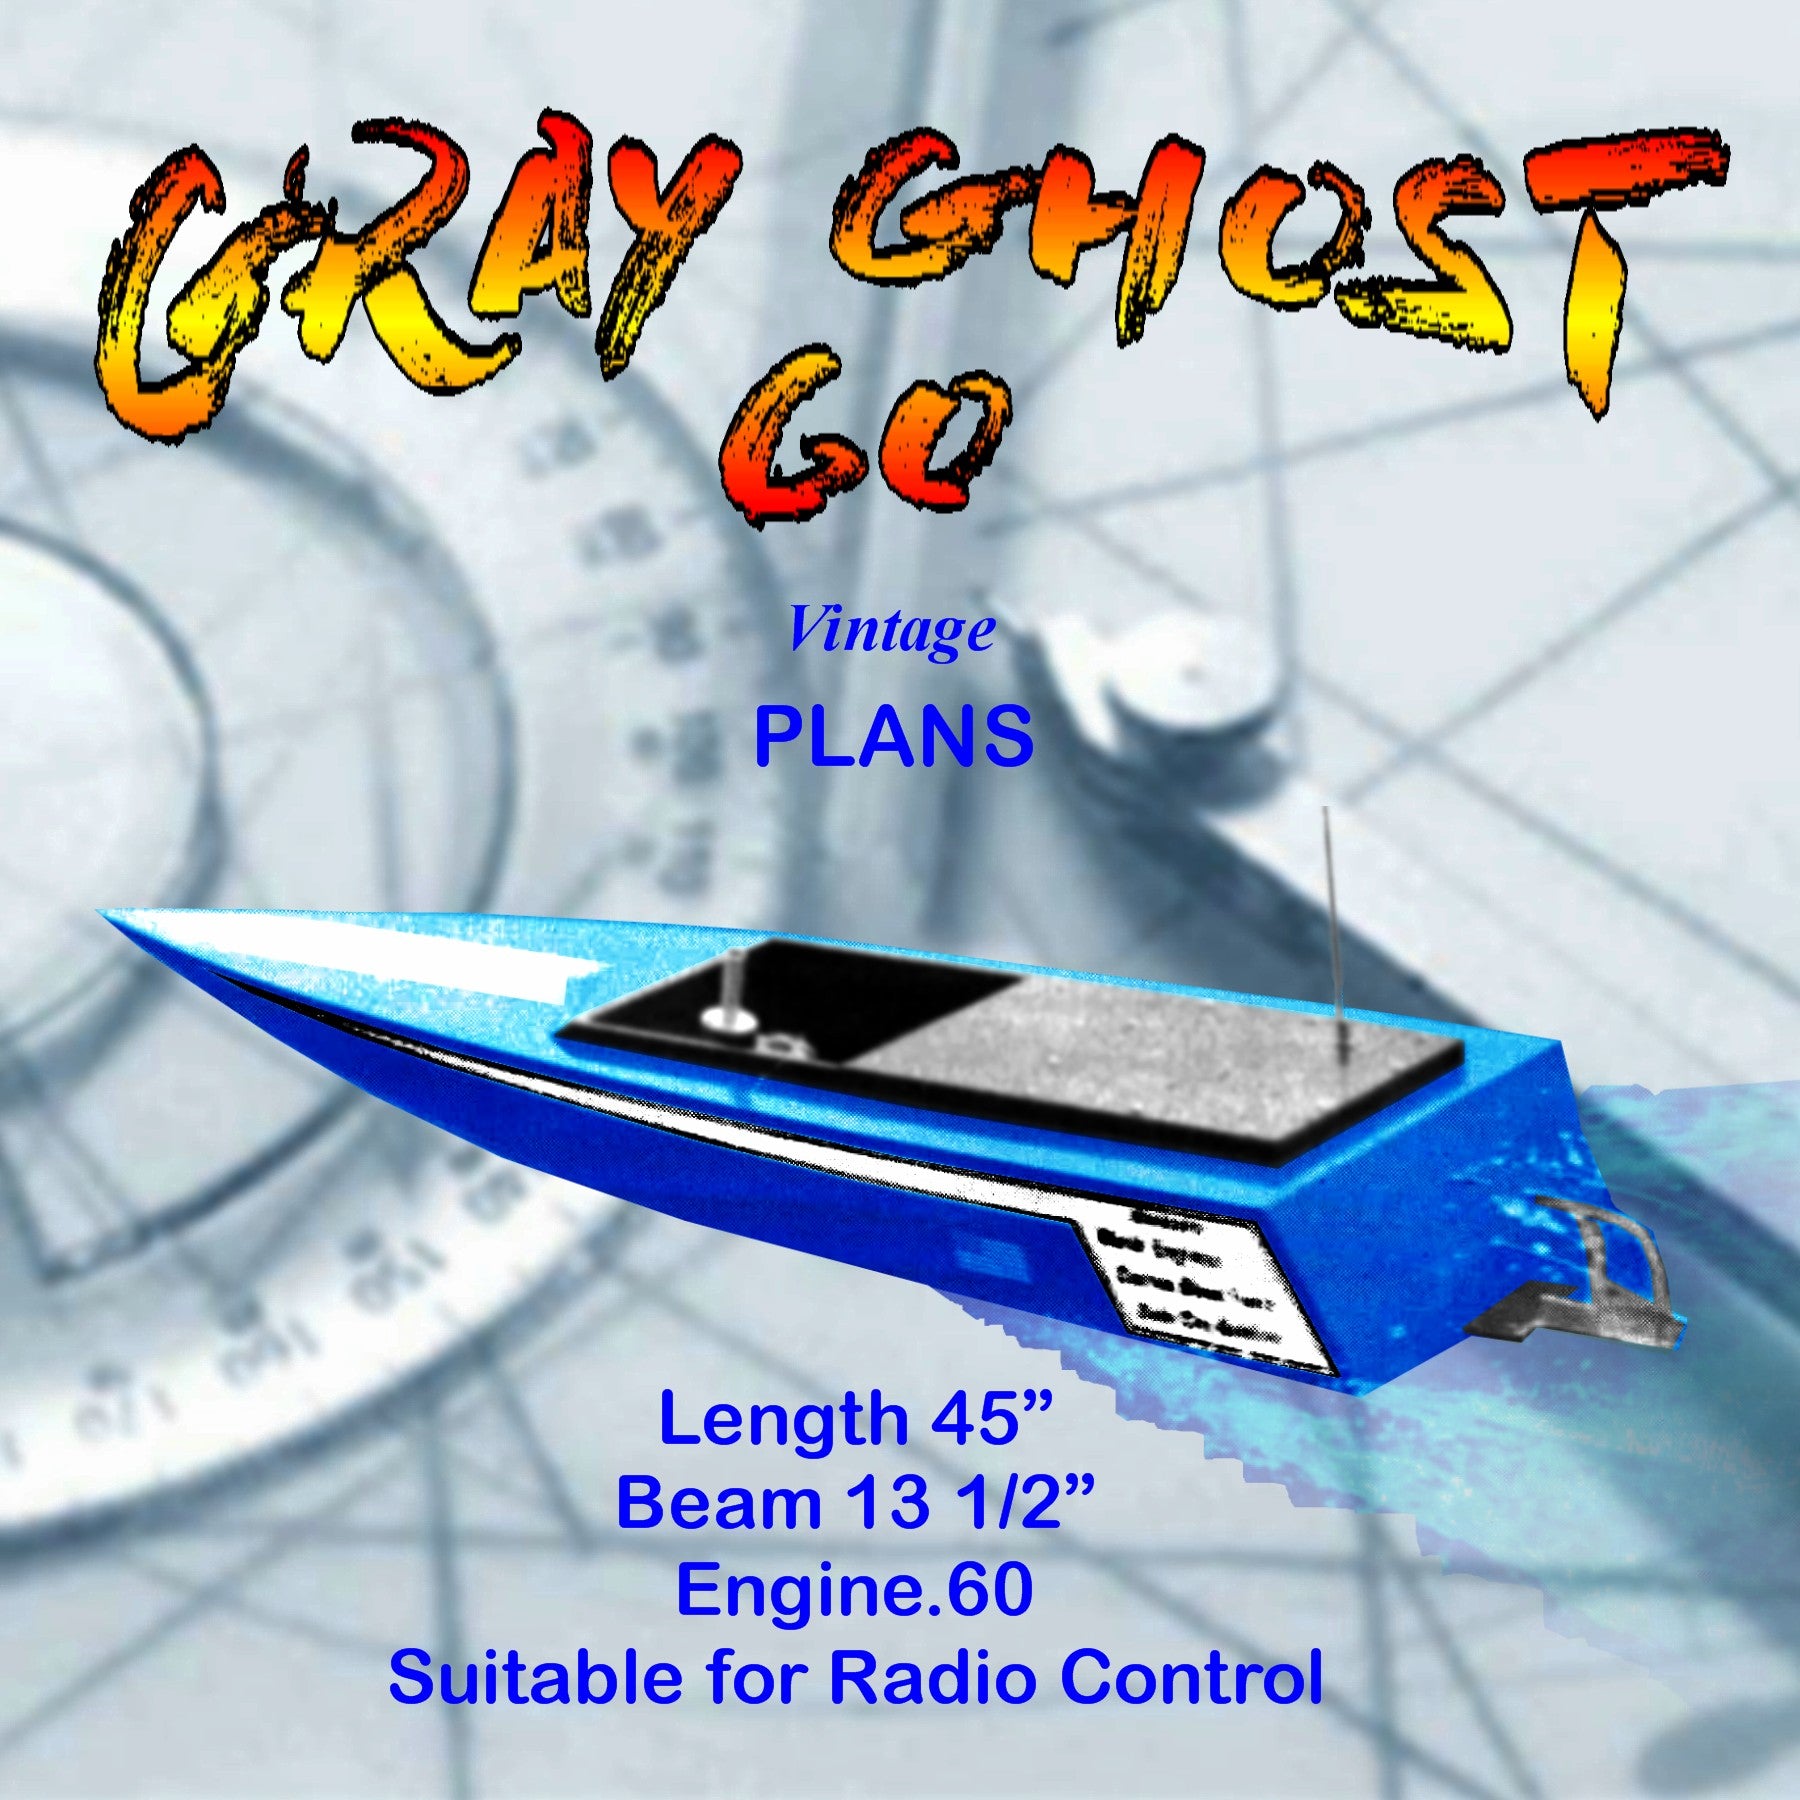 full size printed plan 45" deep vee gray ghost 60 suitable for radio control